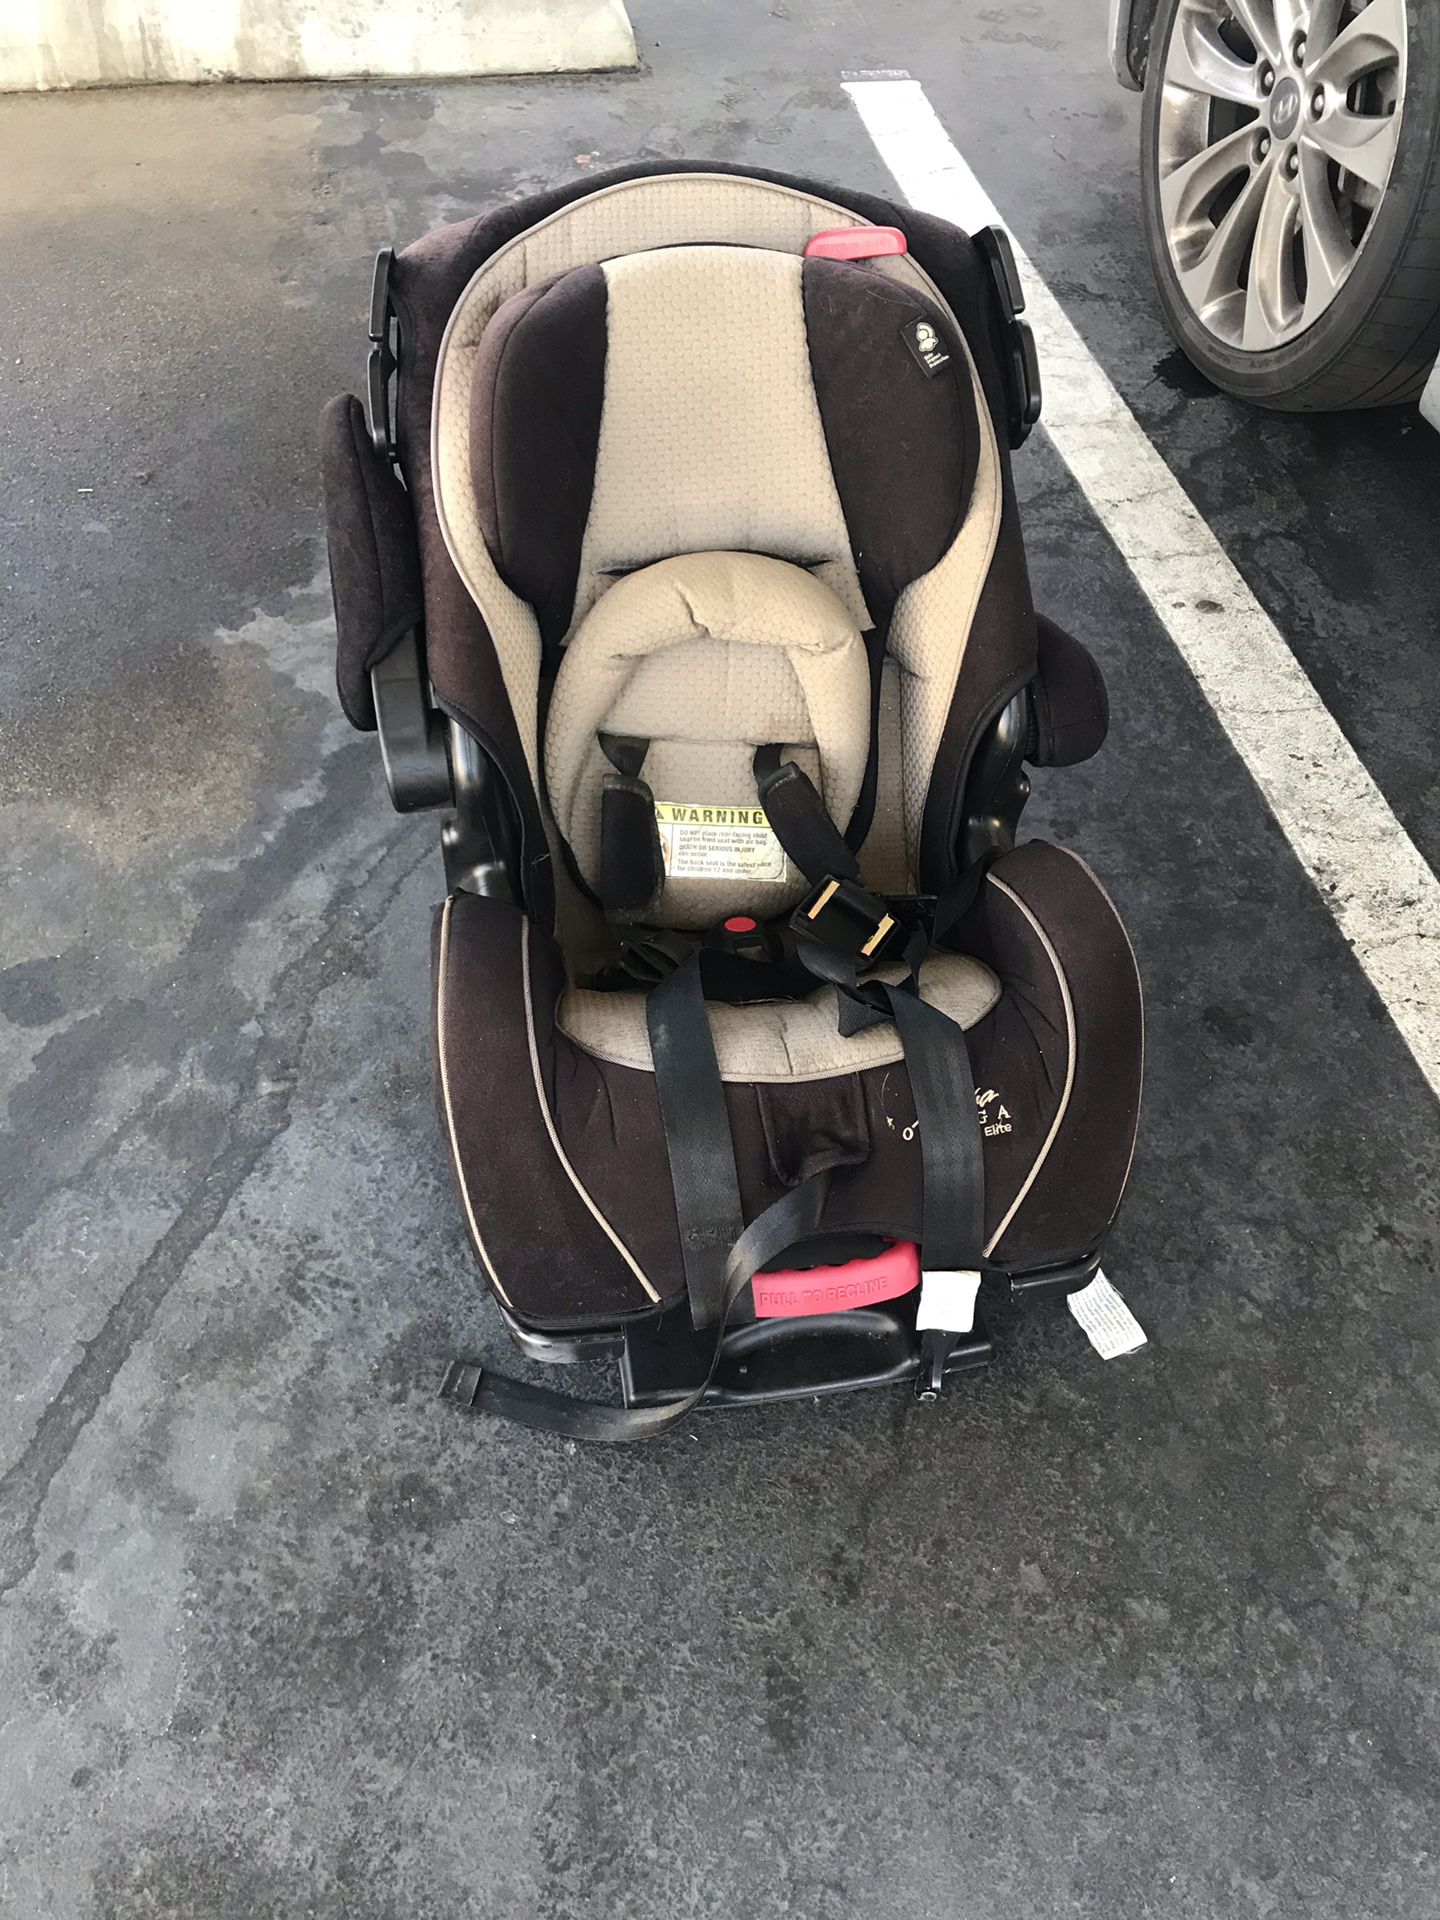 Adjustable car seat with base need gone ASAP today cheap $20